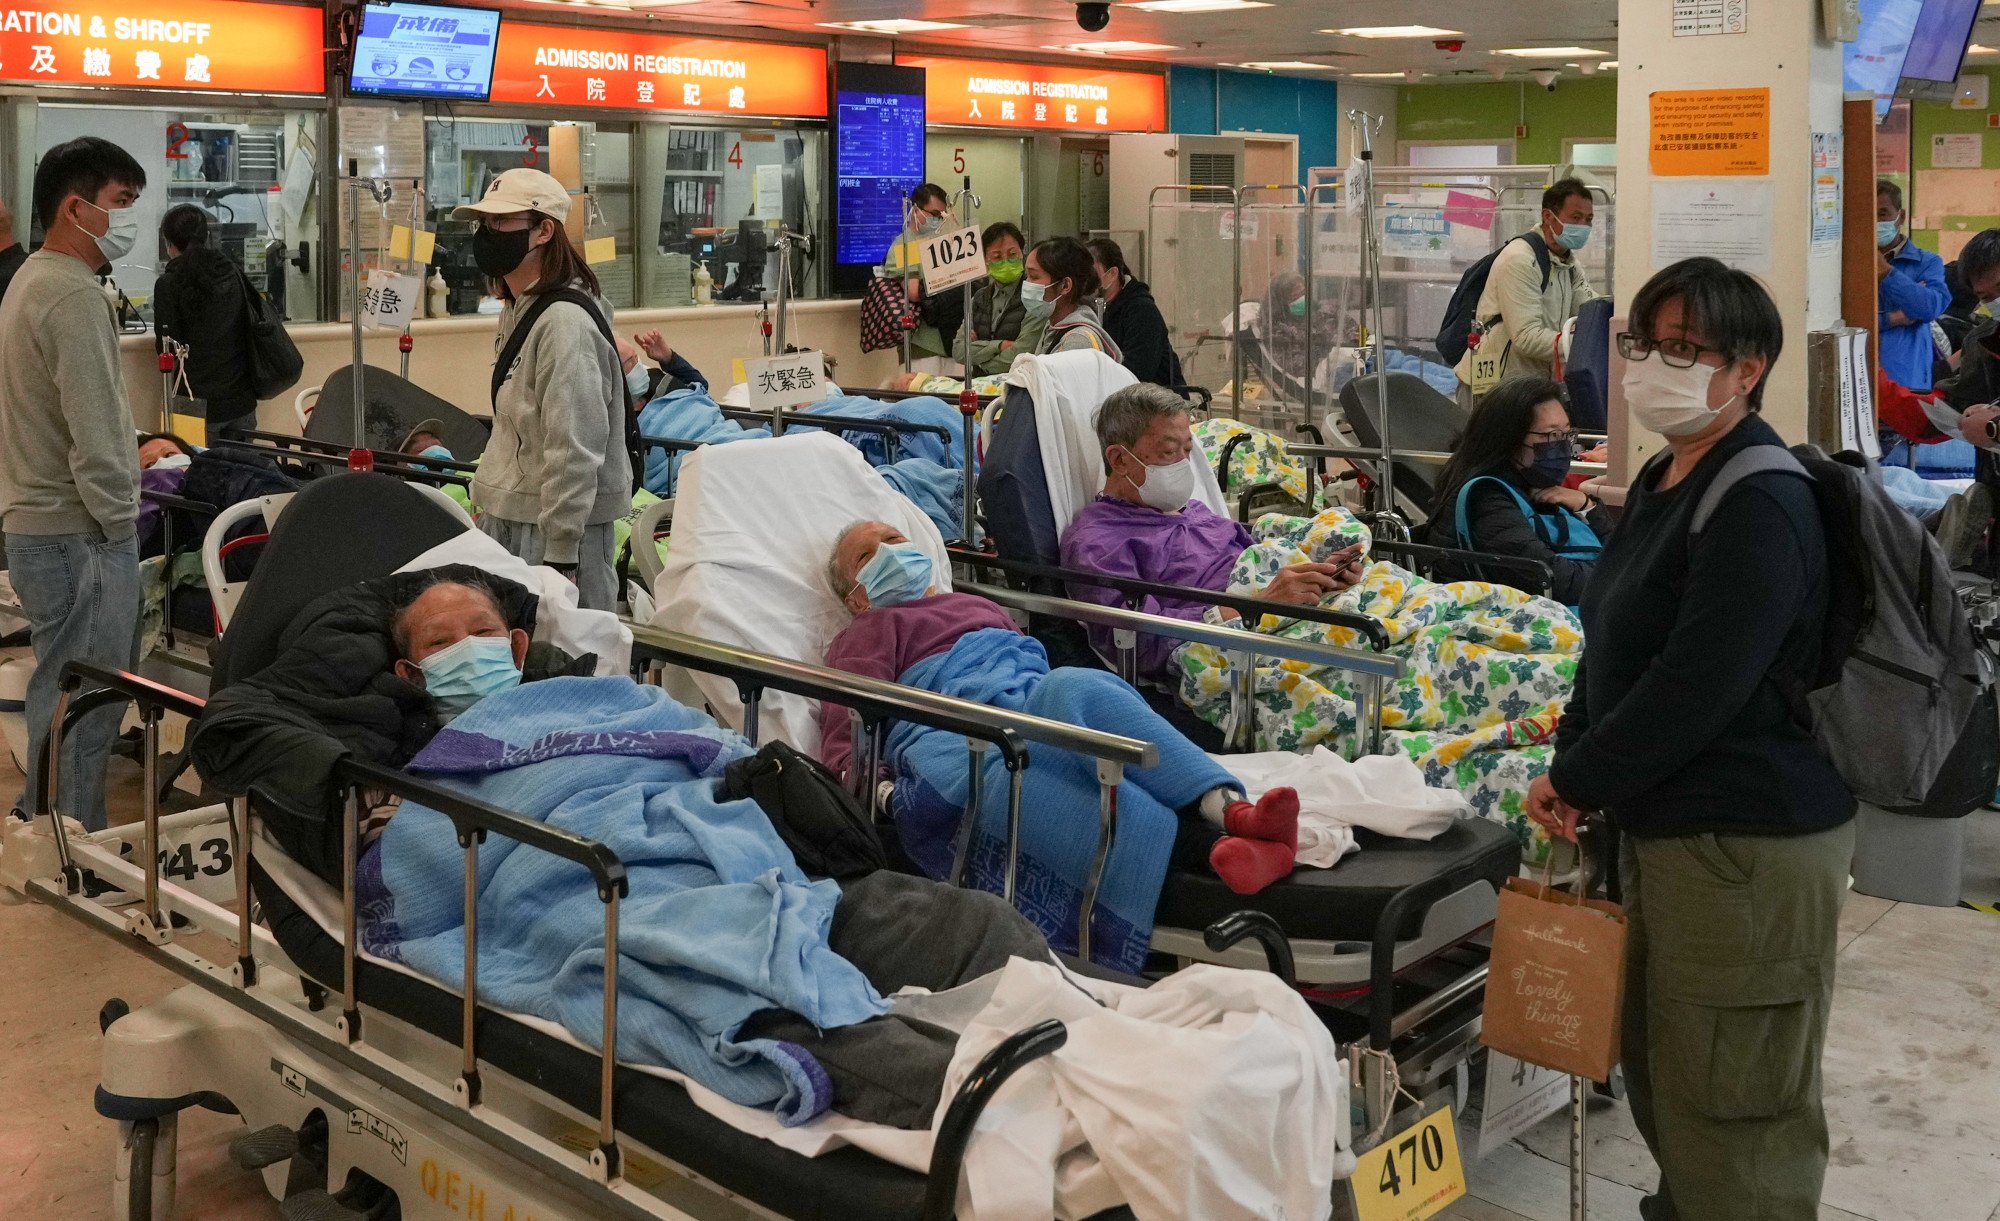 come flu season, hong kong hospitals are mobbed again. why won’t everyone just get jabbed?